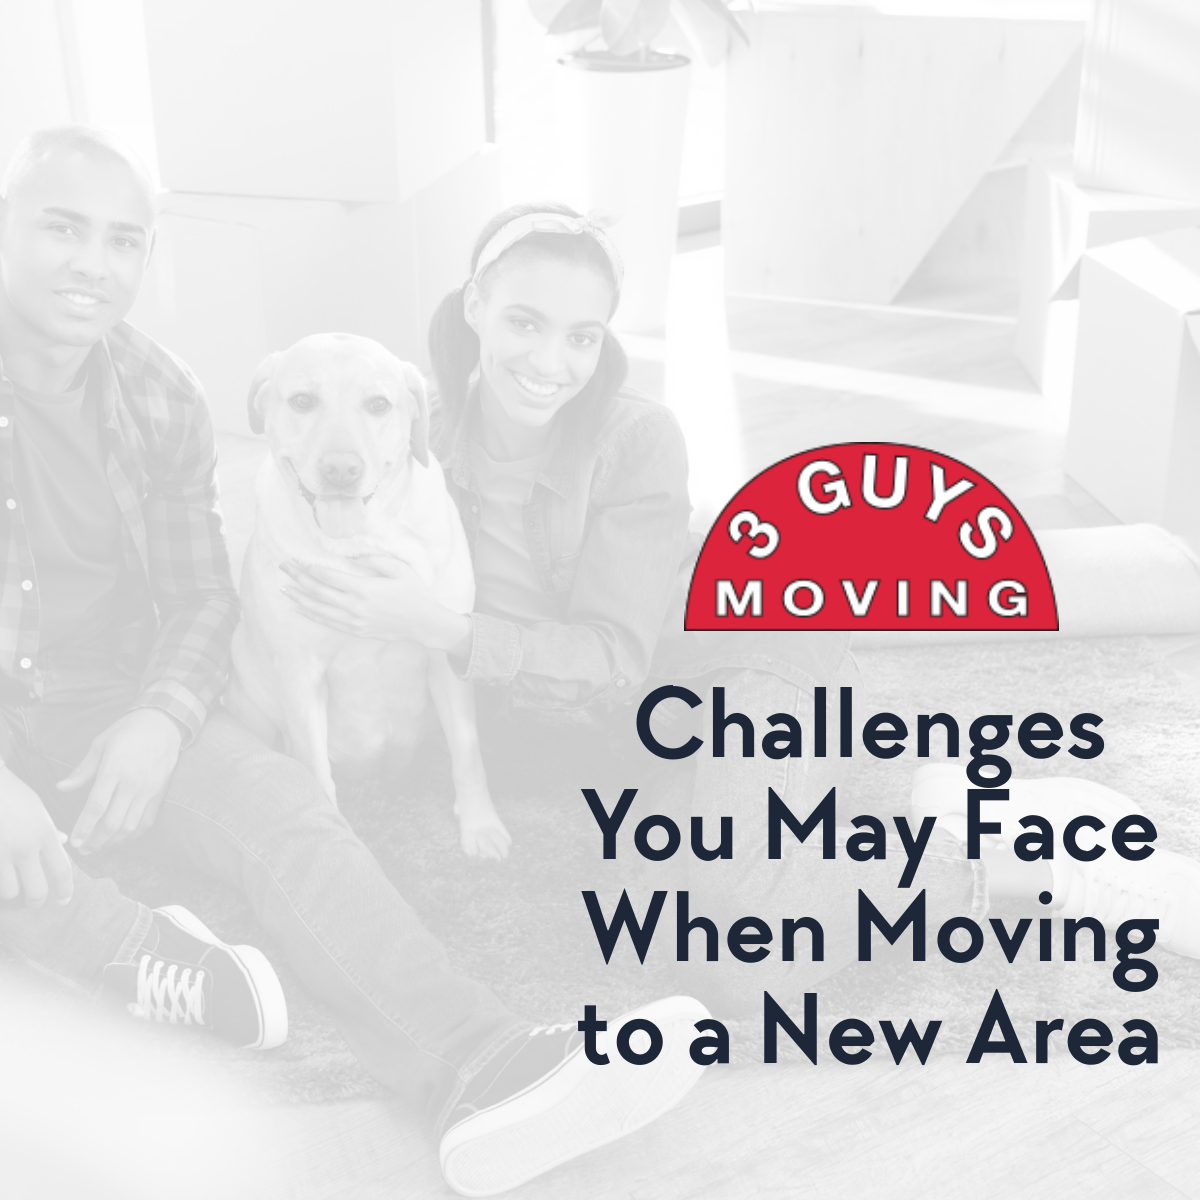 Challenges You May Face When Moving to a New Area - Challenges You May Face When Moving to a New Area